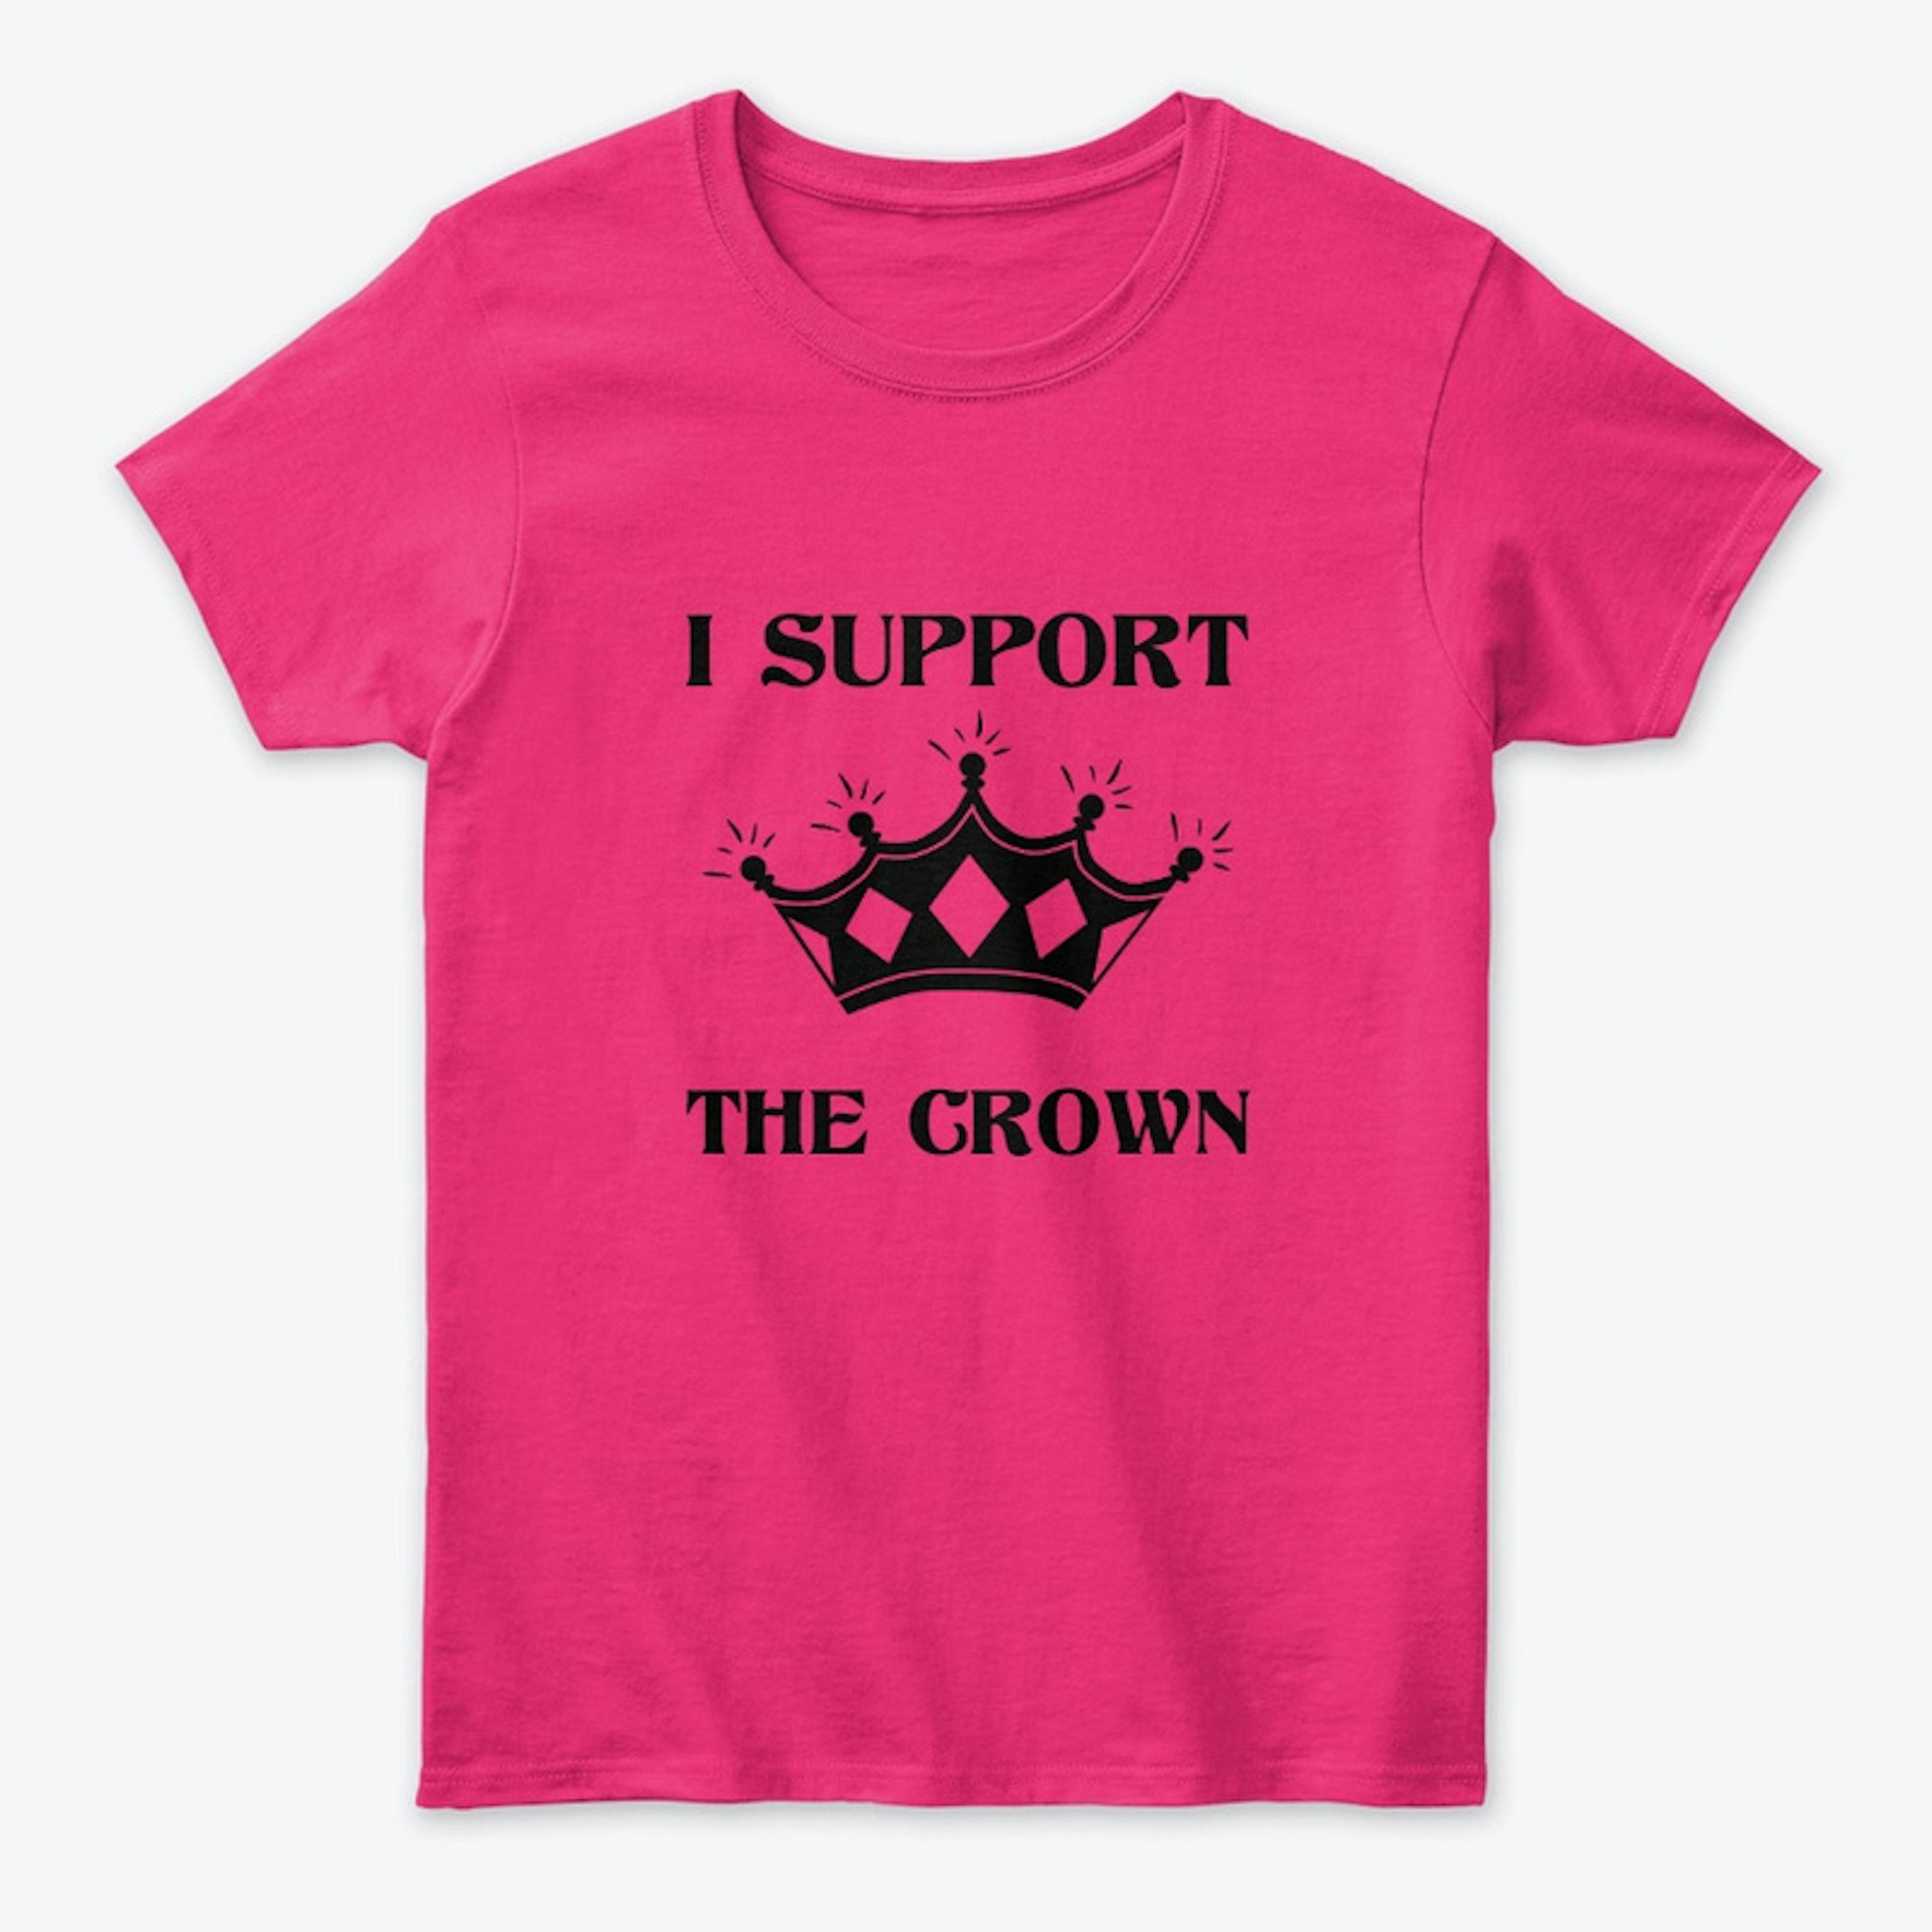 I Support The Crown Tee blk